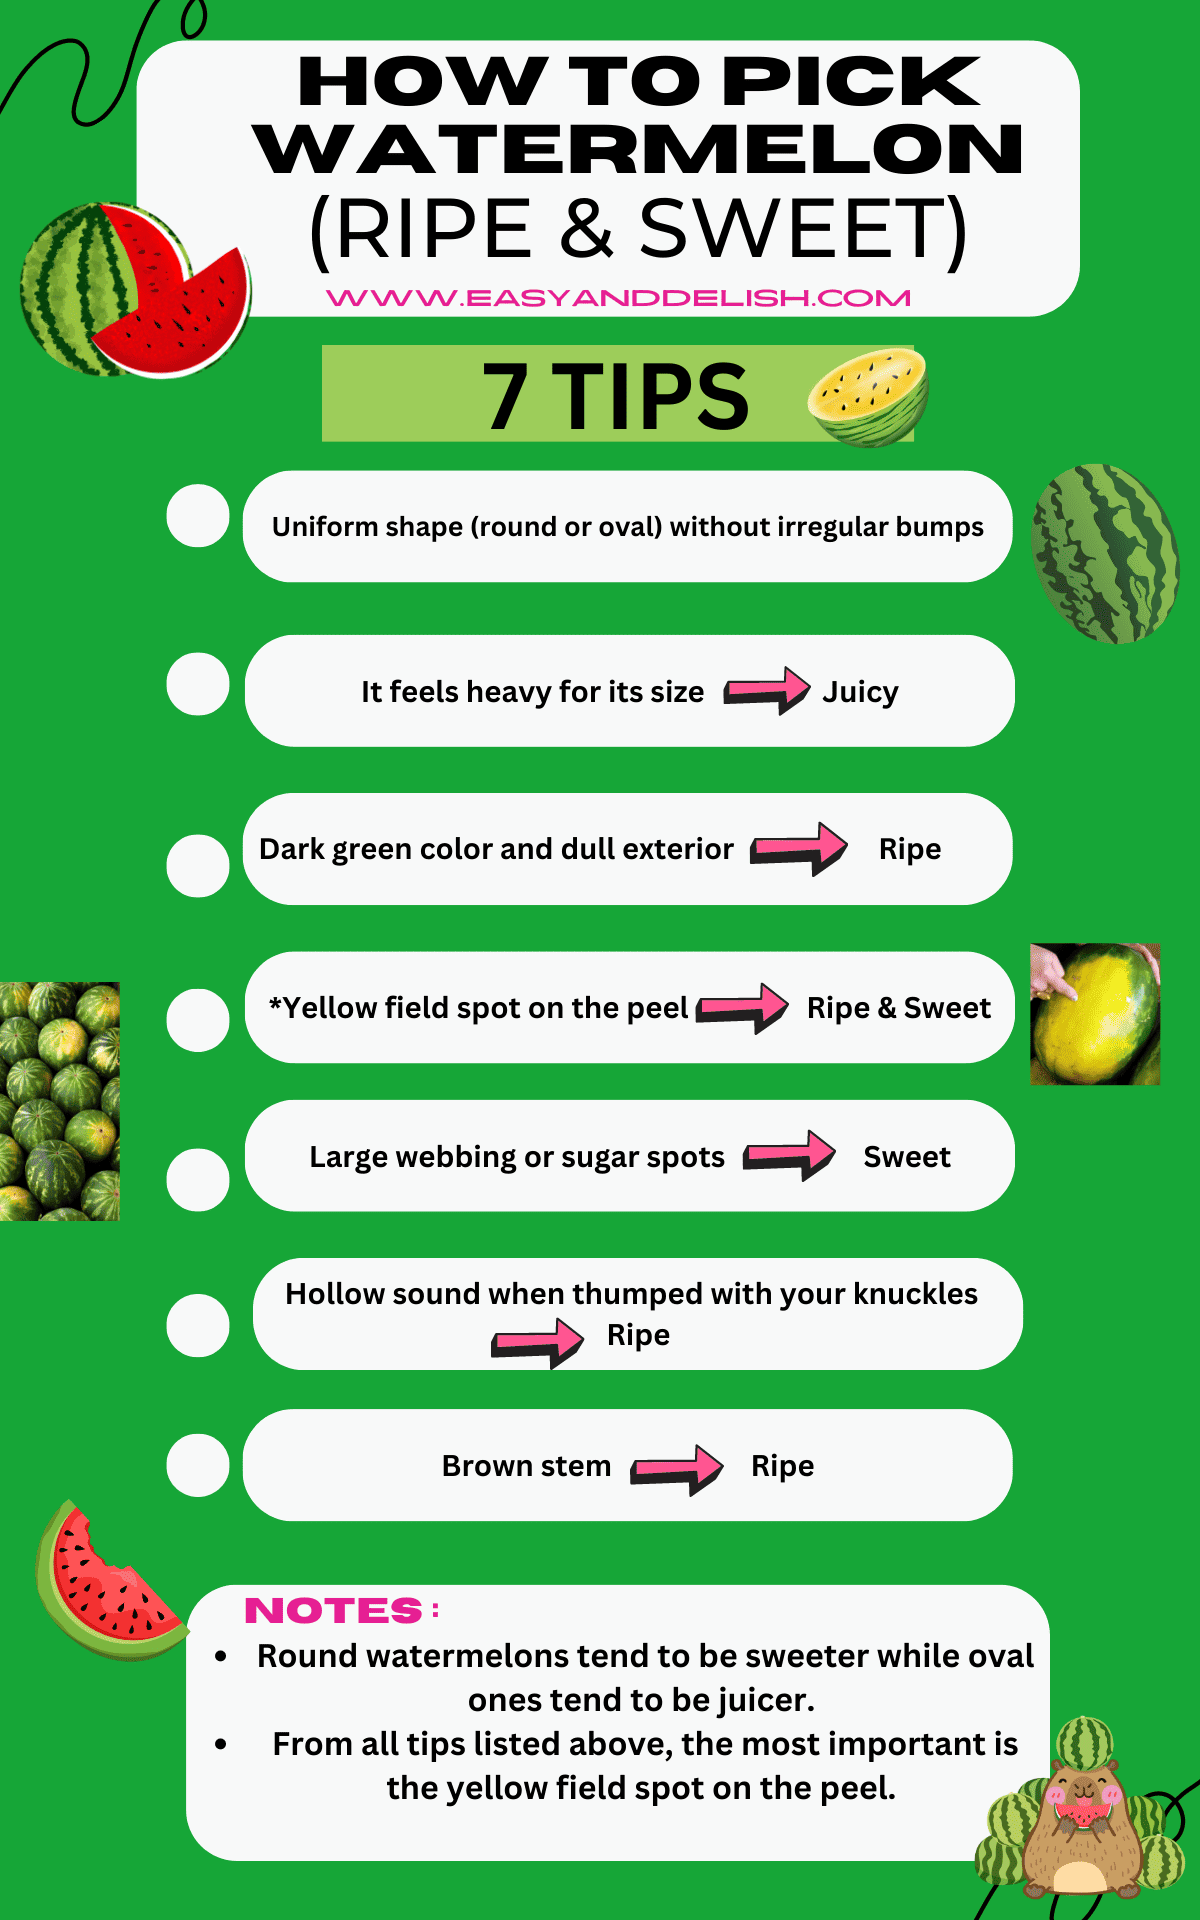 chart listing 7 tips for how to pick watermelon that is ripe and sweet.